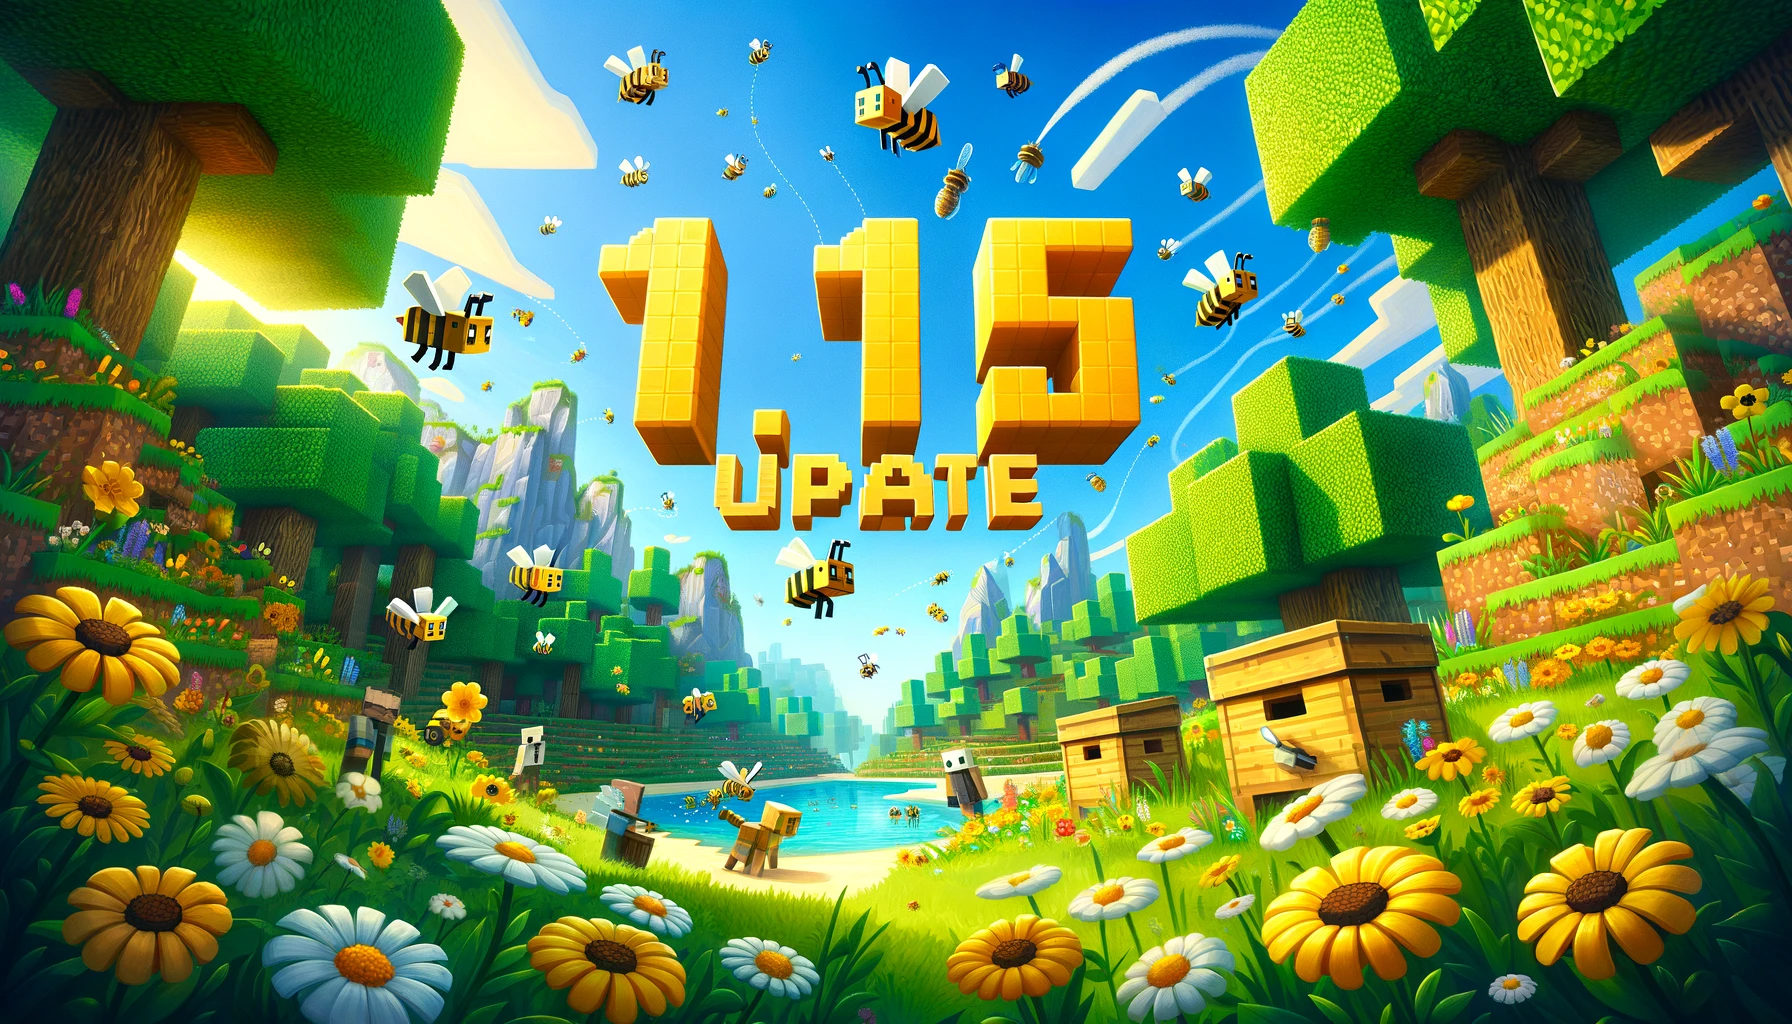 Minecraft 1.15: The Buzzy Bees Update